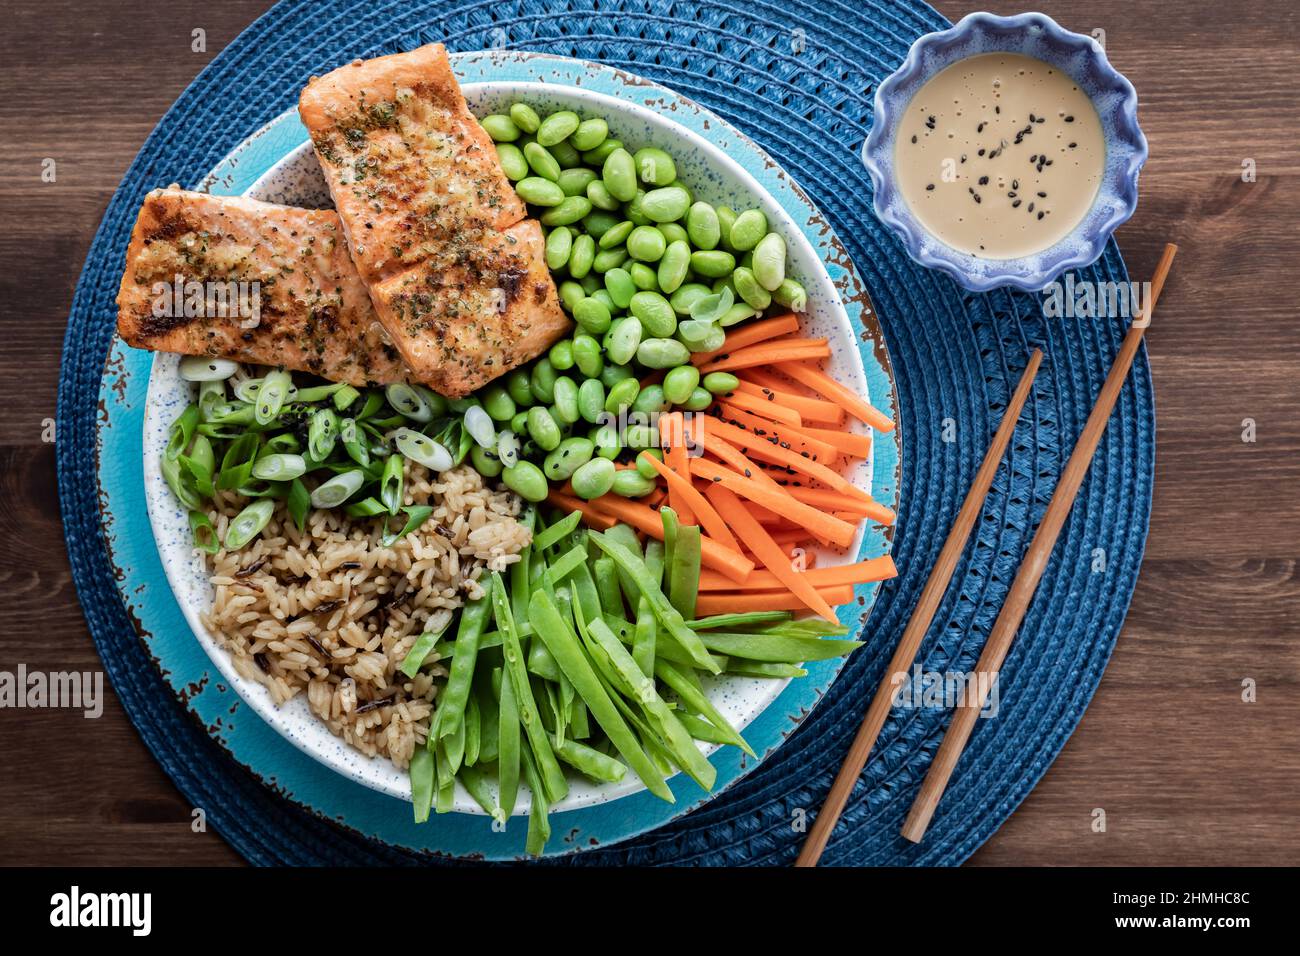 Top down view of a freshly made Asian salmon salad bowl, ready for eating. Stock Photo